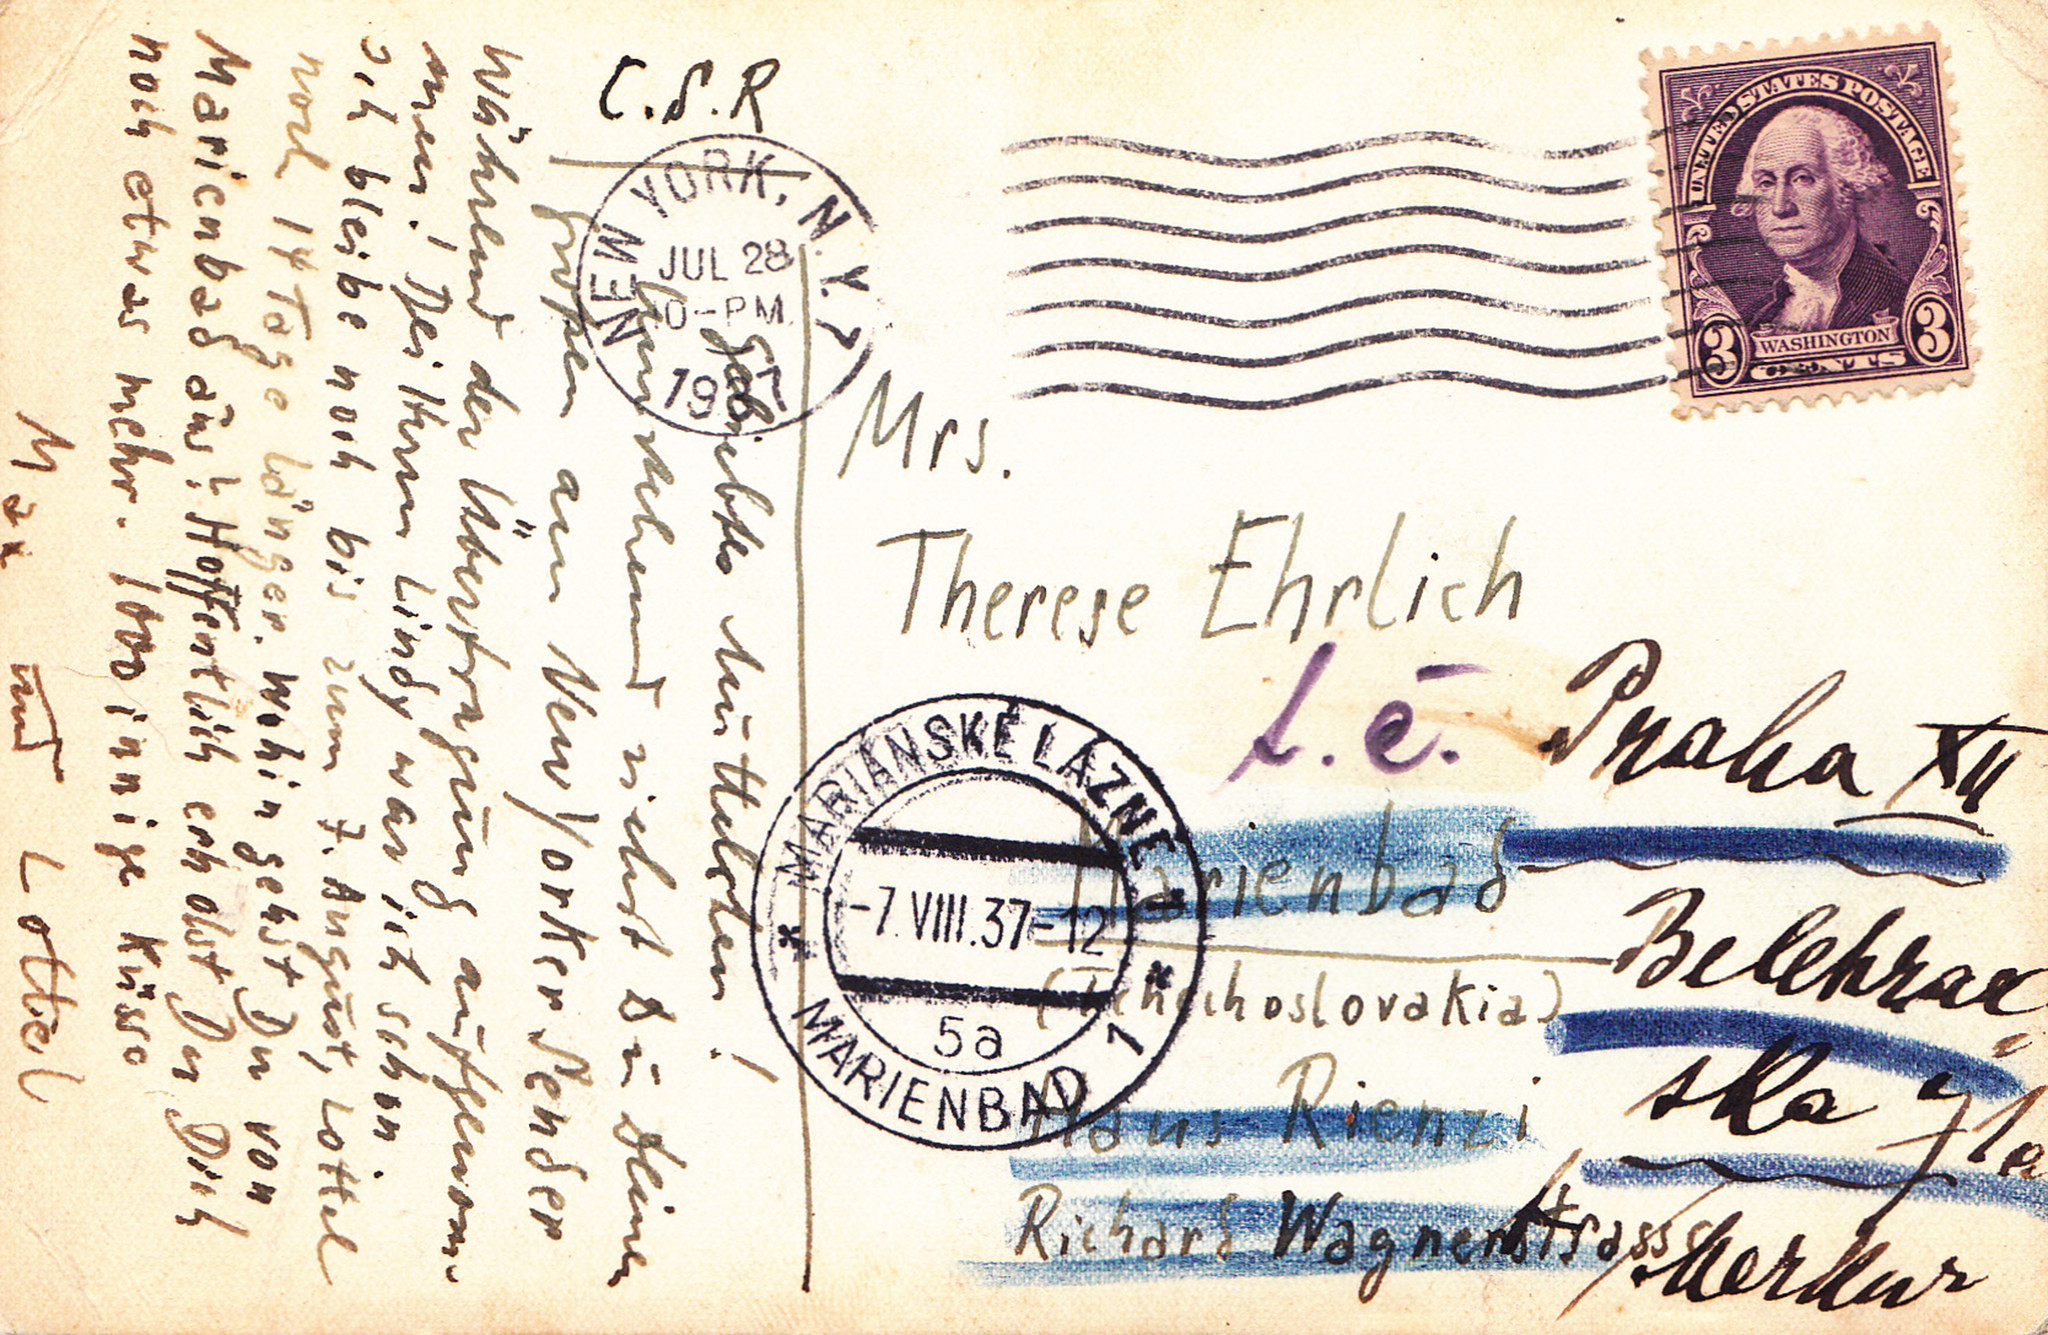 A postcard from Max Ehrlich, postmarked July 28, 1937 in New York, sent to his mother Therese about